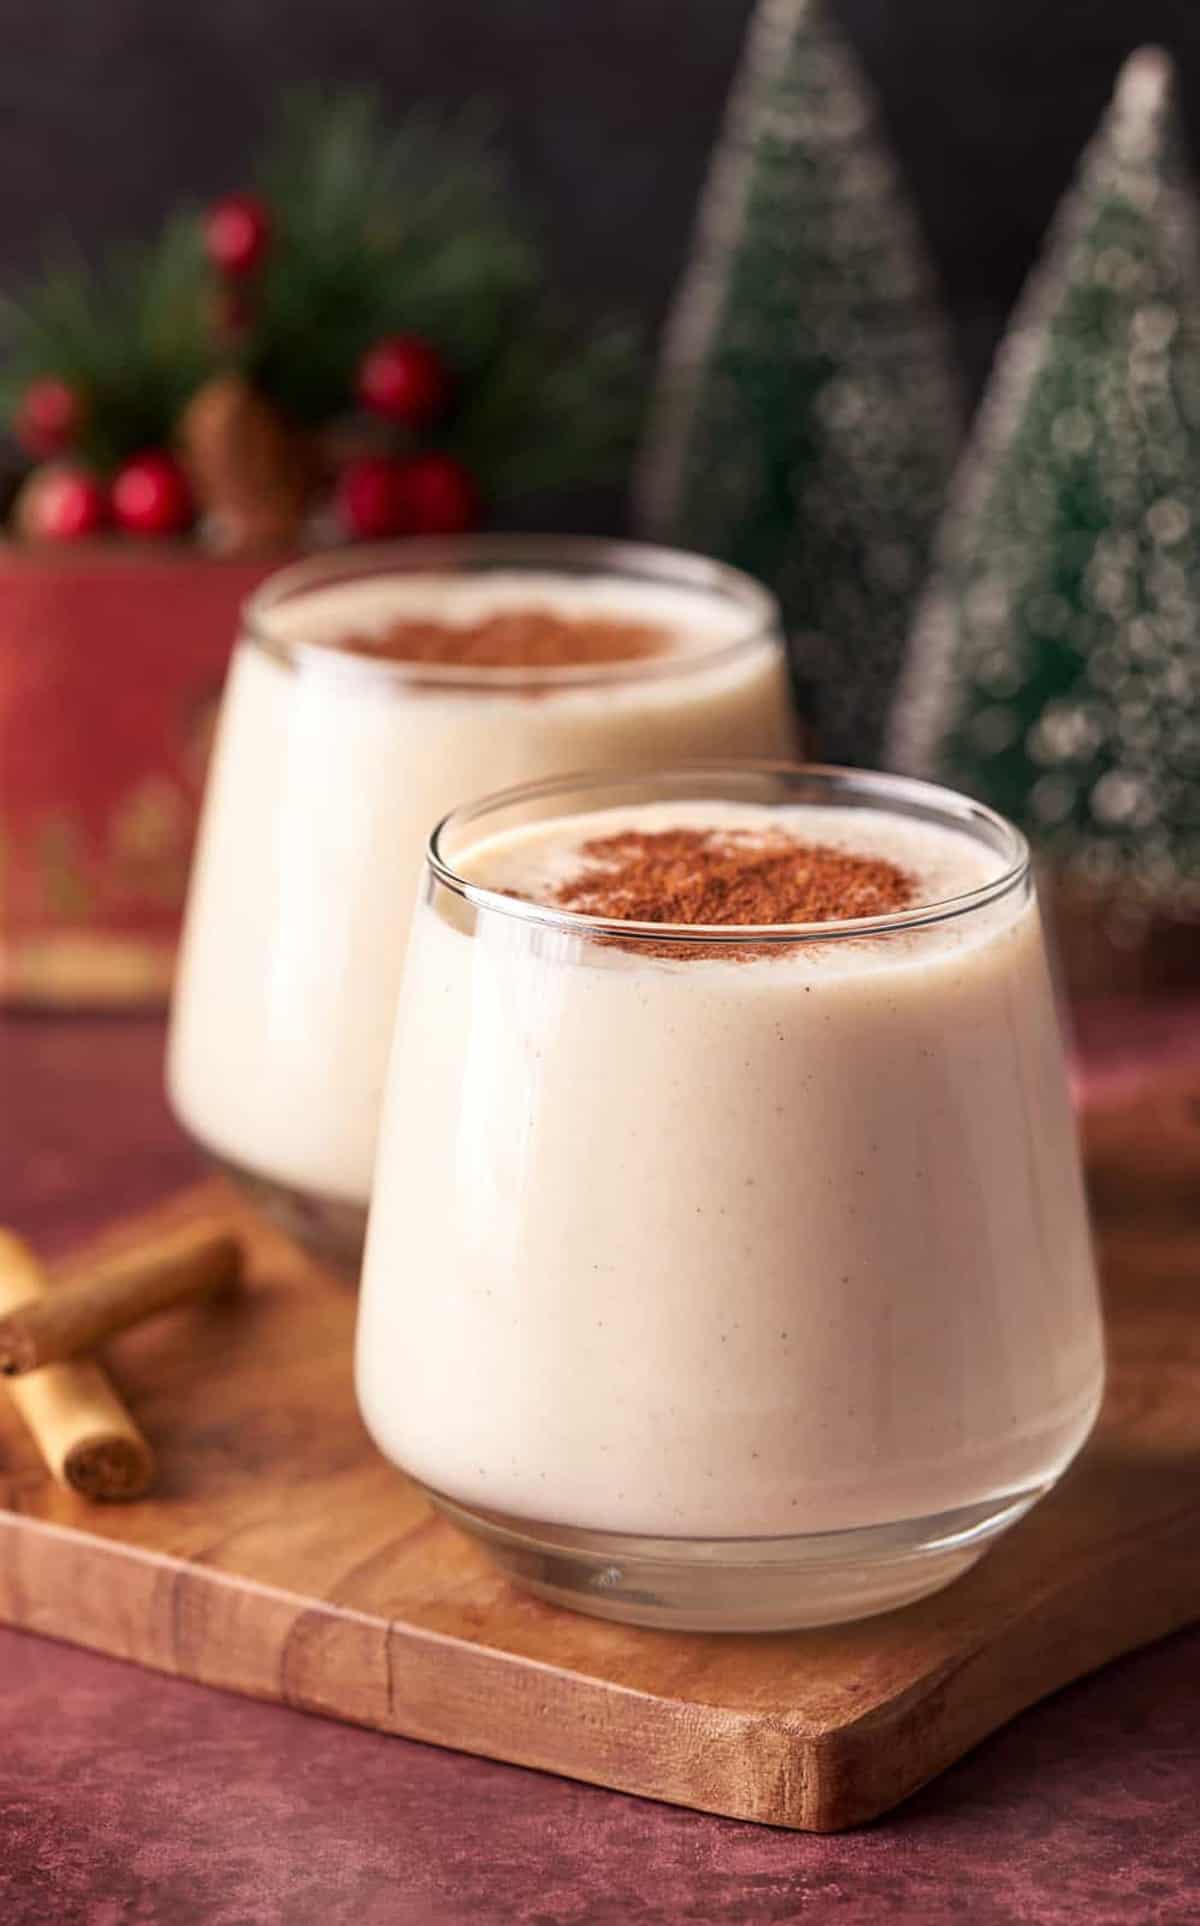 Two glasses of the Coquito on wooden board with cinnamon sticks and topped with ground cinnamon.